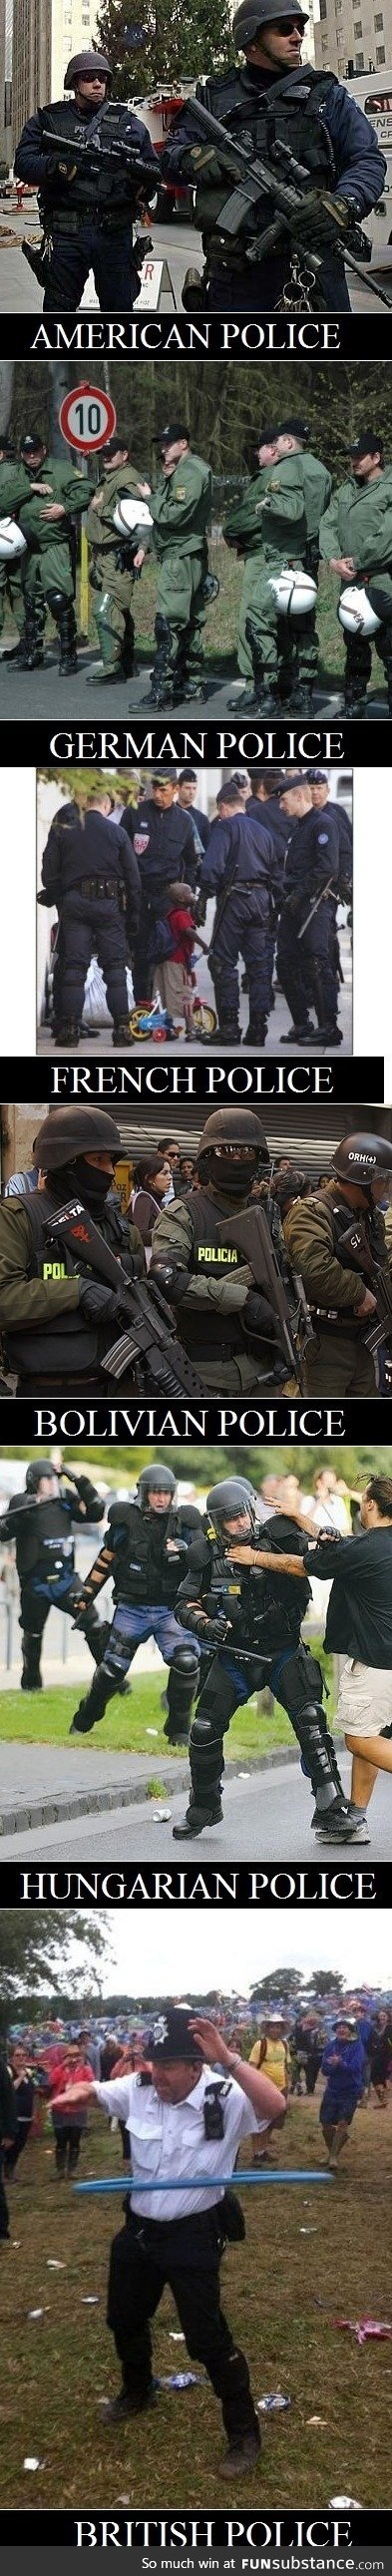 Police in different countries